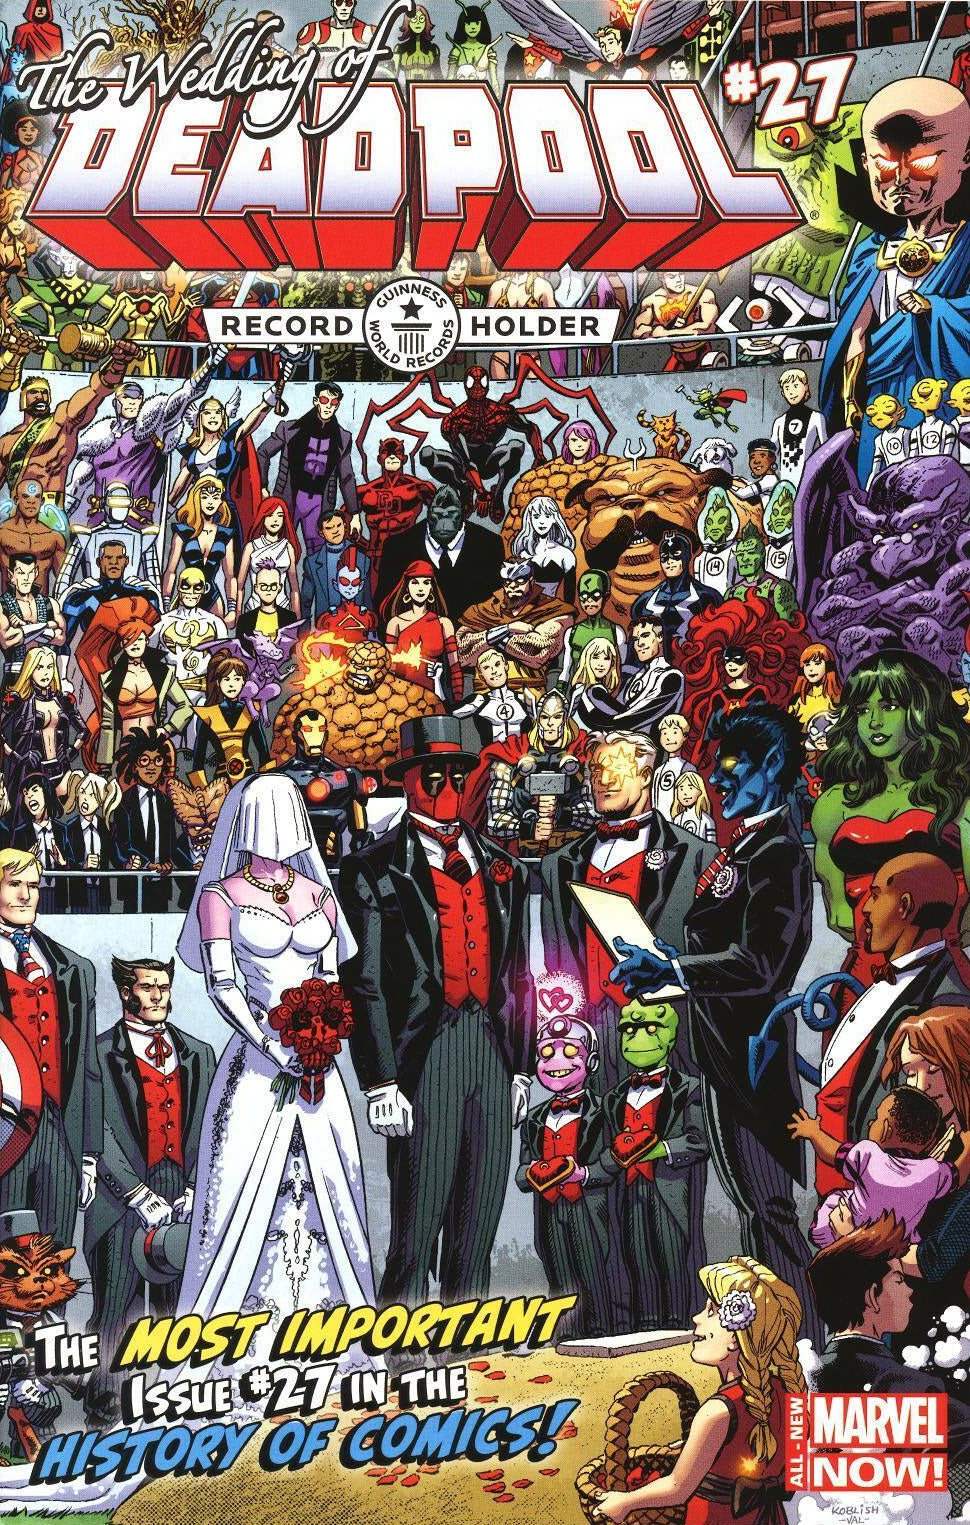 THE WEDDING OF DEADPOOL  # 27 VARIANT WRAP AROUND COVER NM / VF MARVEL COMIC BOOK 2014